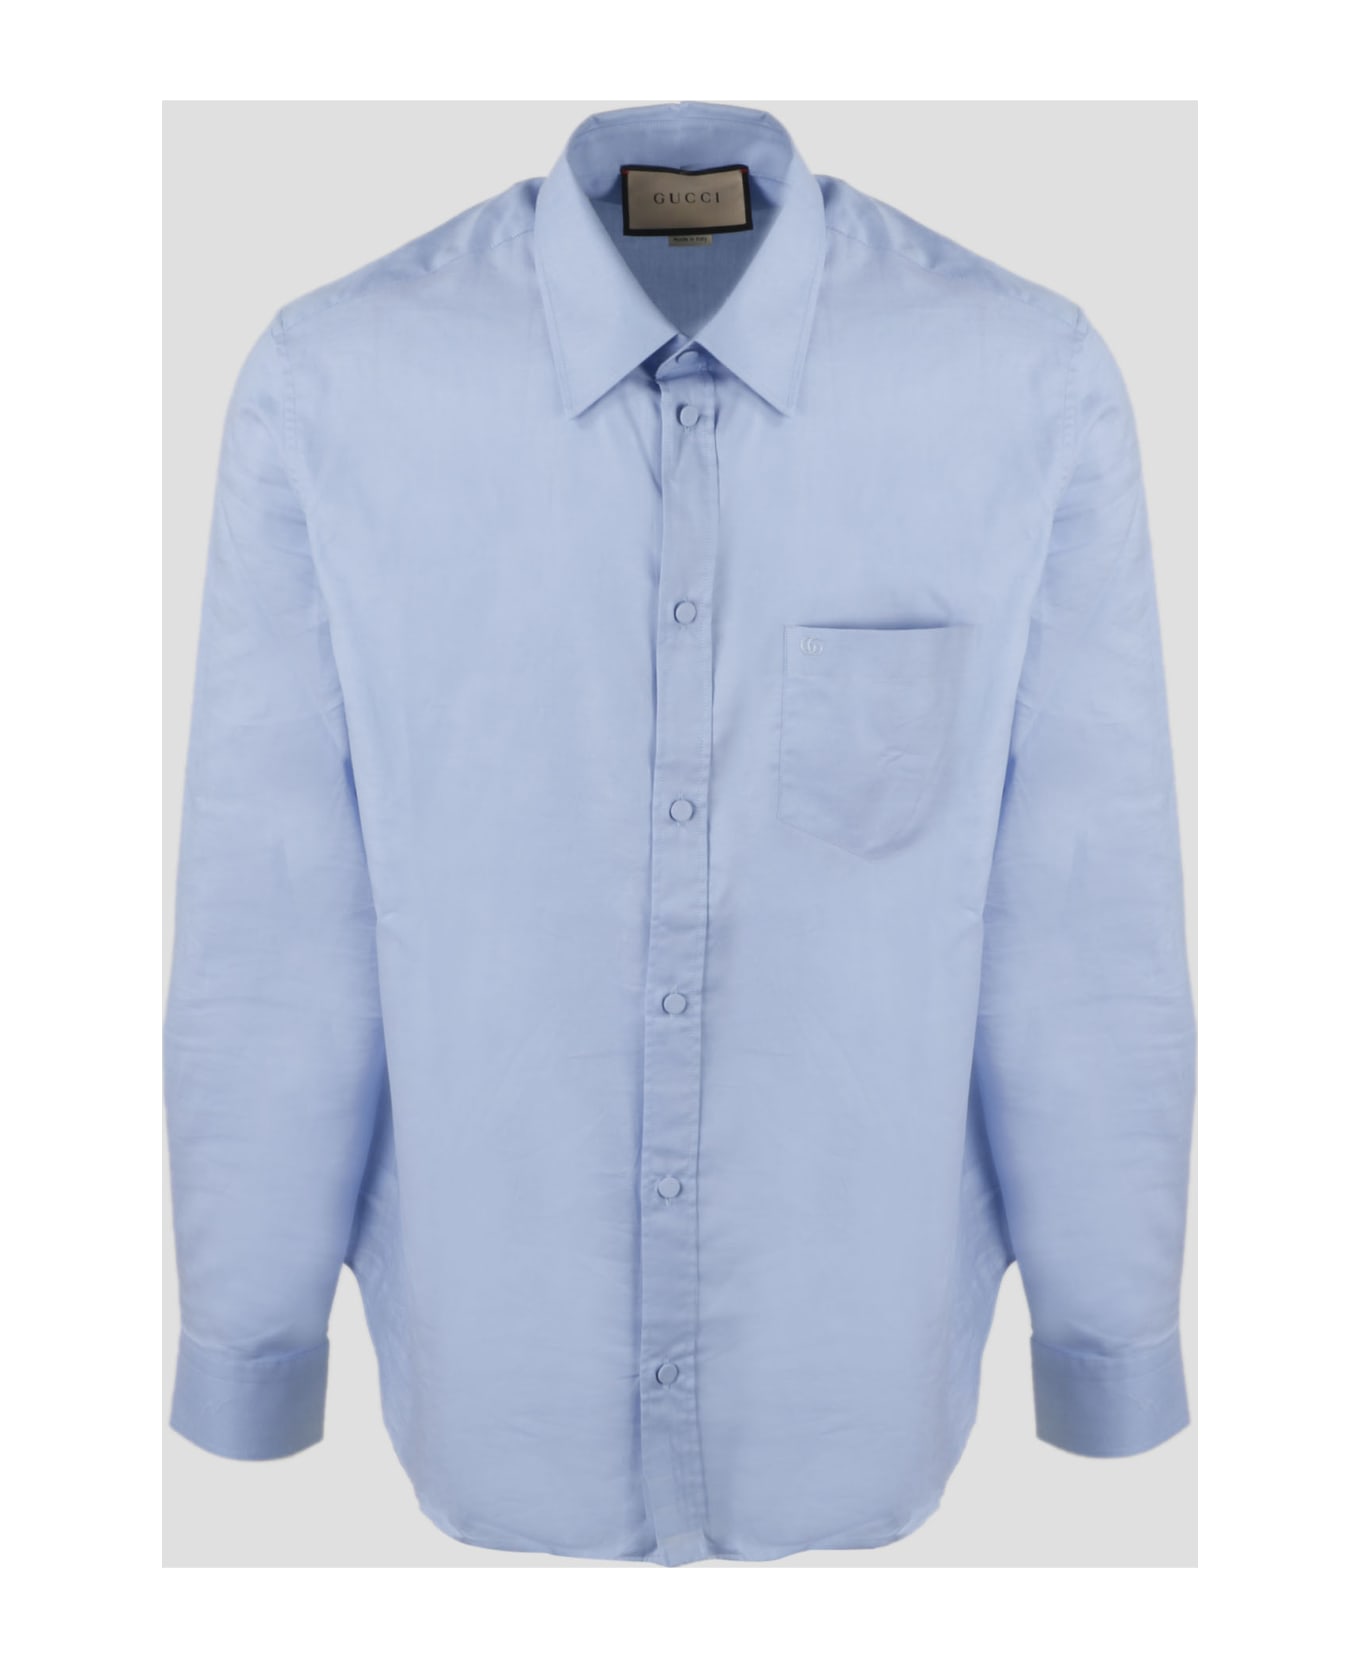 Gucci Double G Oxford Cotton zip-up - Blue